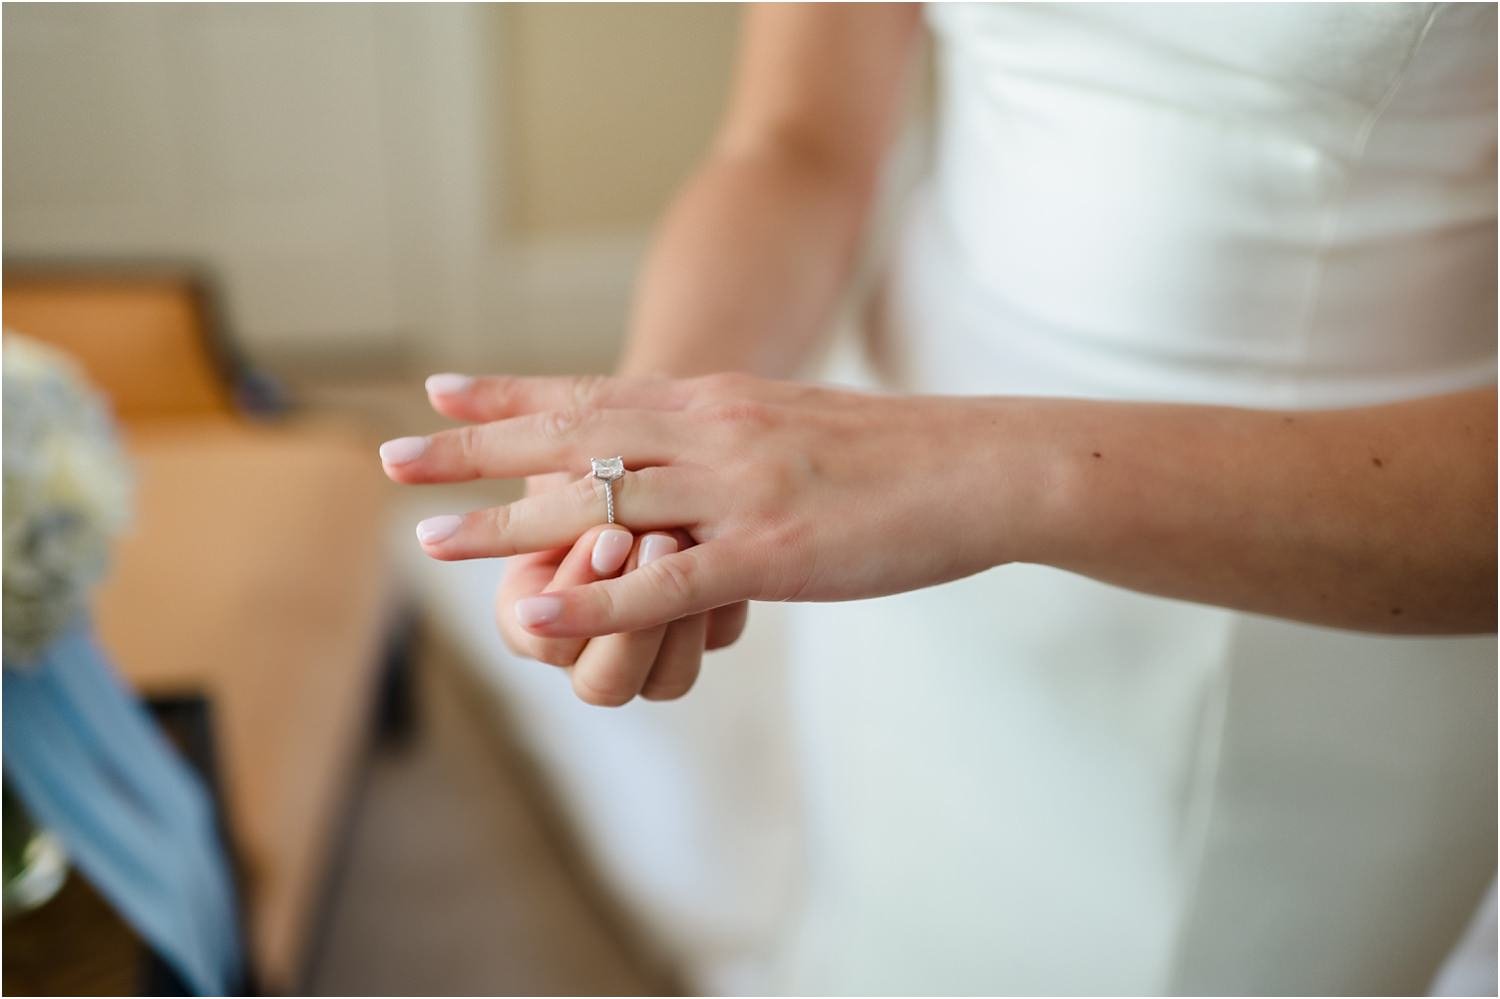  A close-up of a woman putting on her wedding ring.  